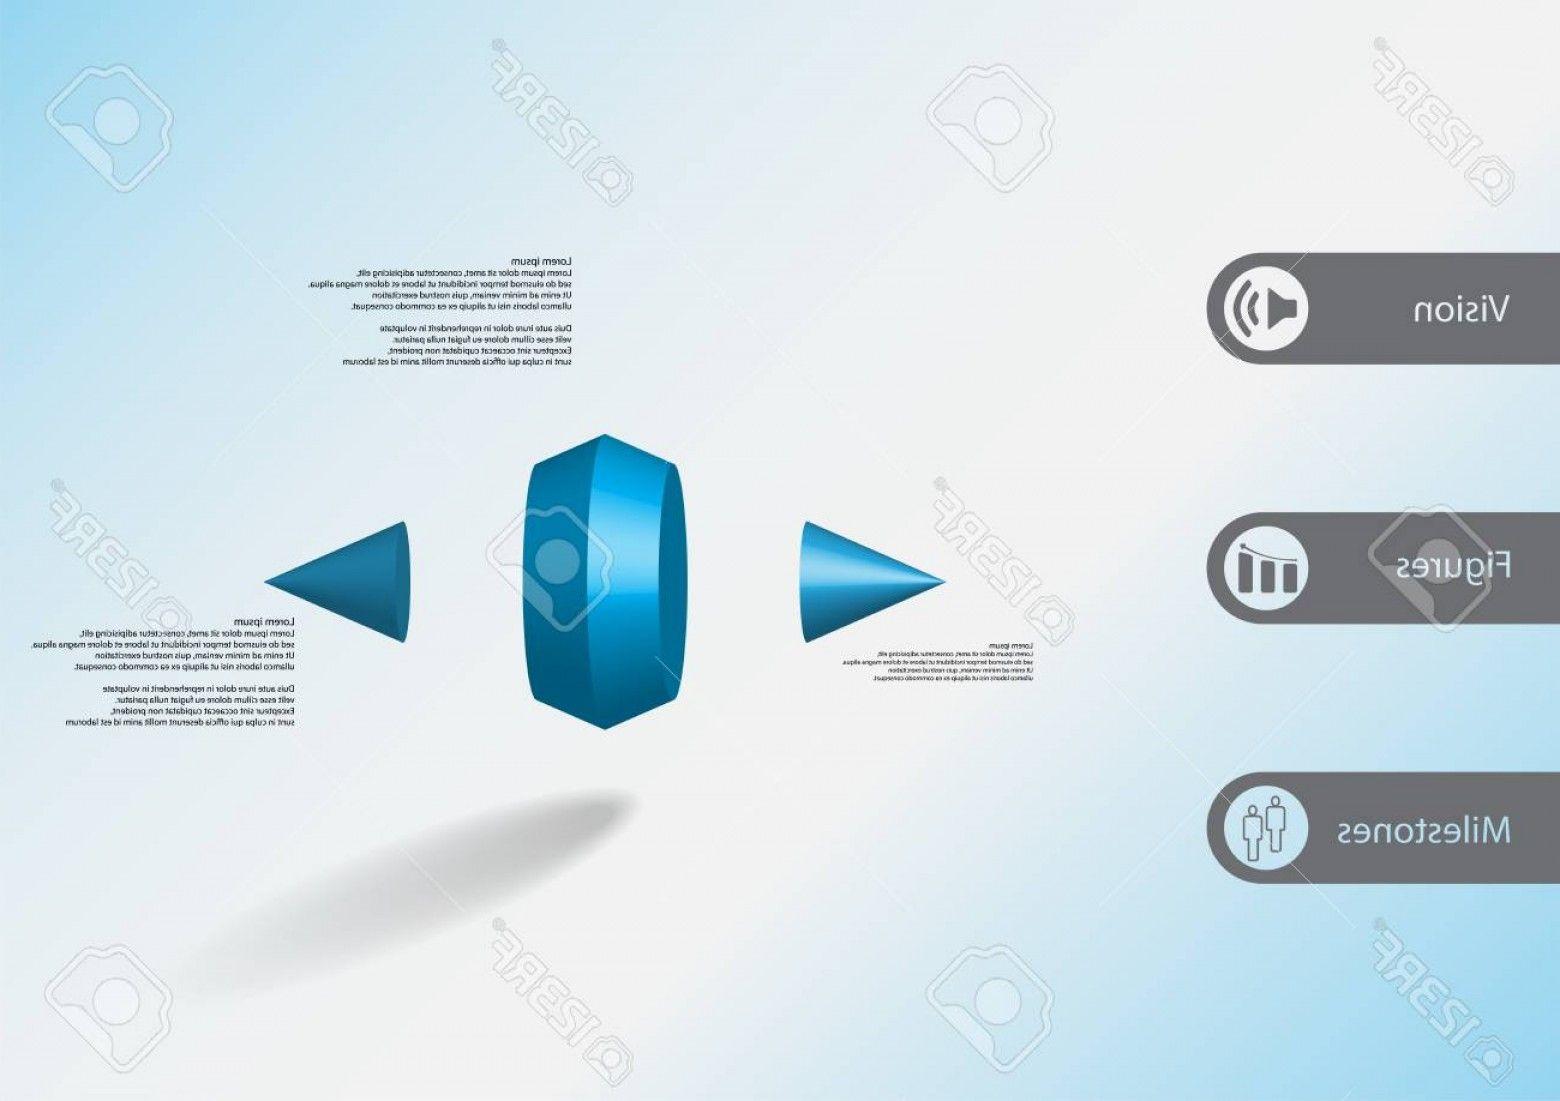 Three Blue Bar Logo - Photostock Vector D Illustration Info Graphic Template With Motif Of